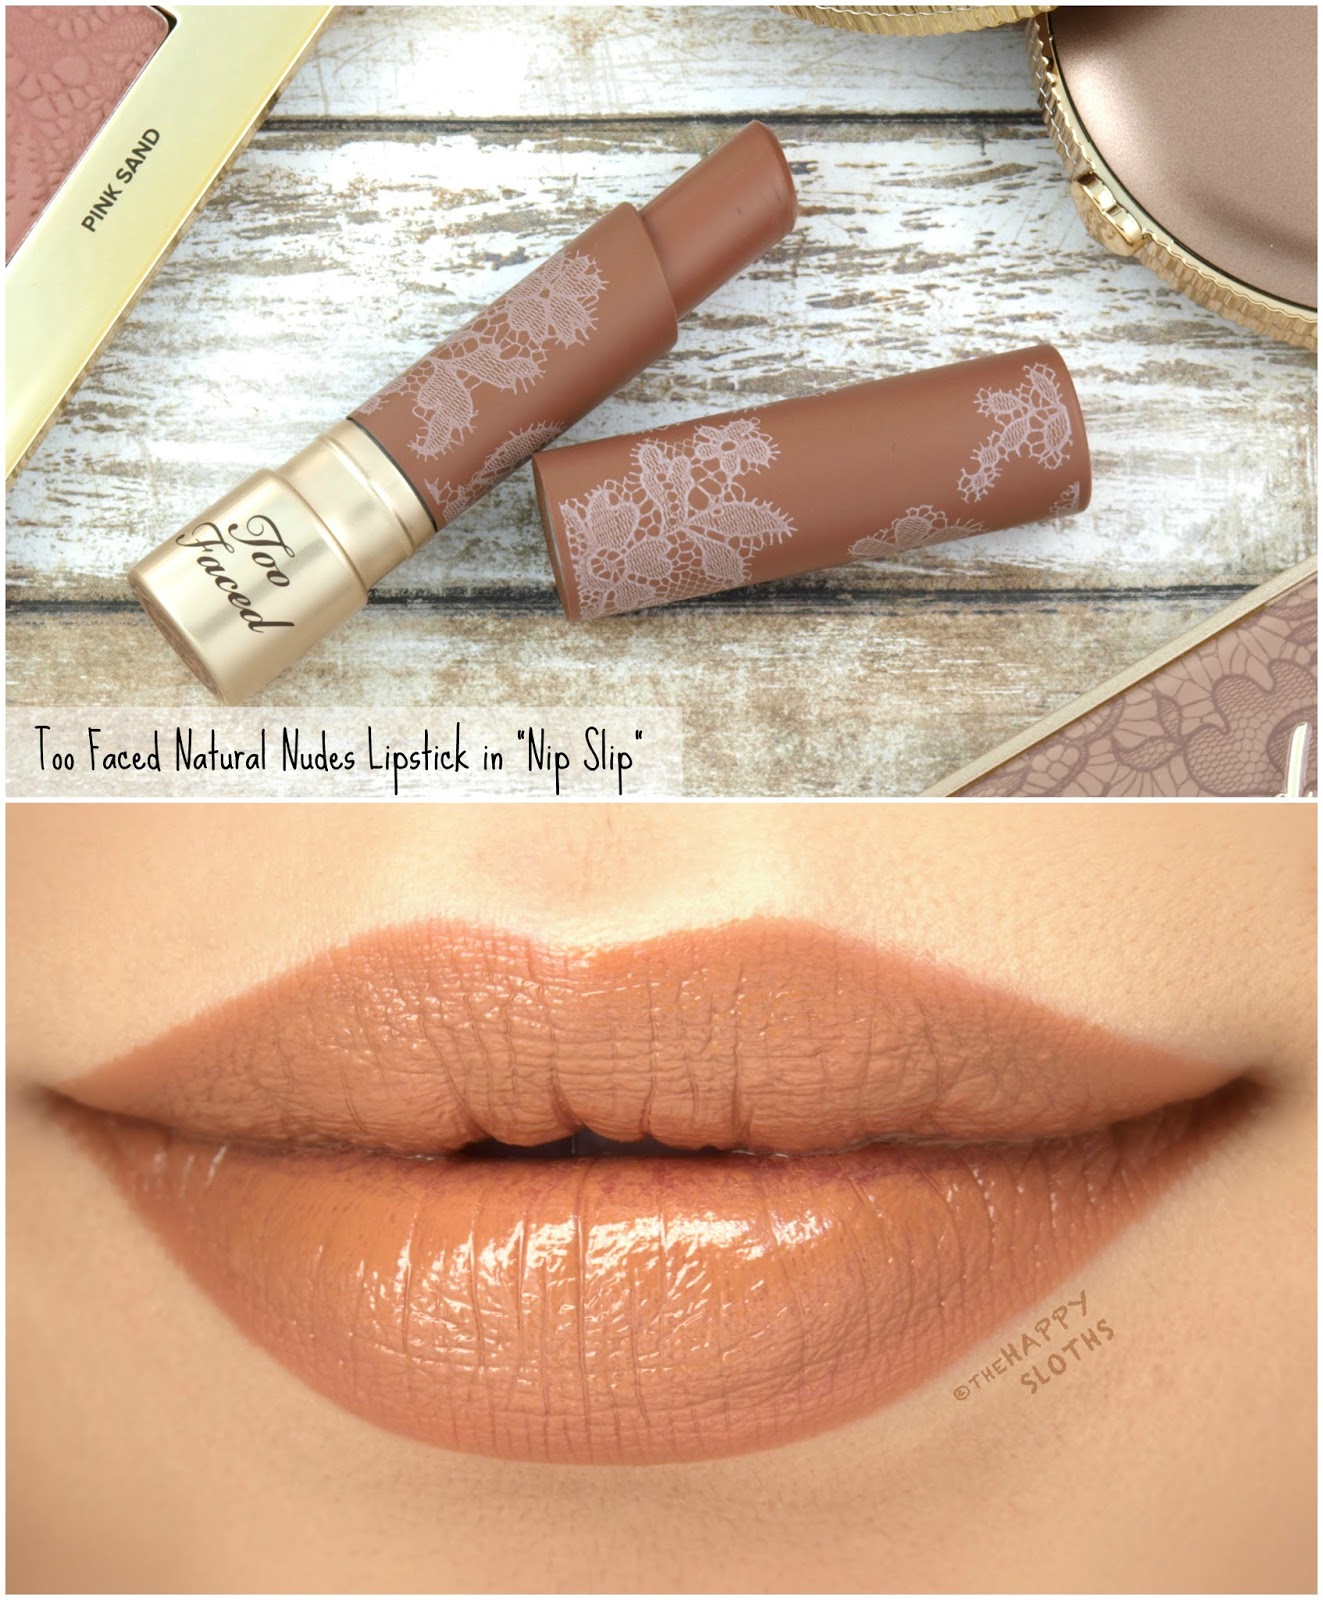 Too Faced | Natural Nudes Lipstick in "Nip Slip": Review and Swatches